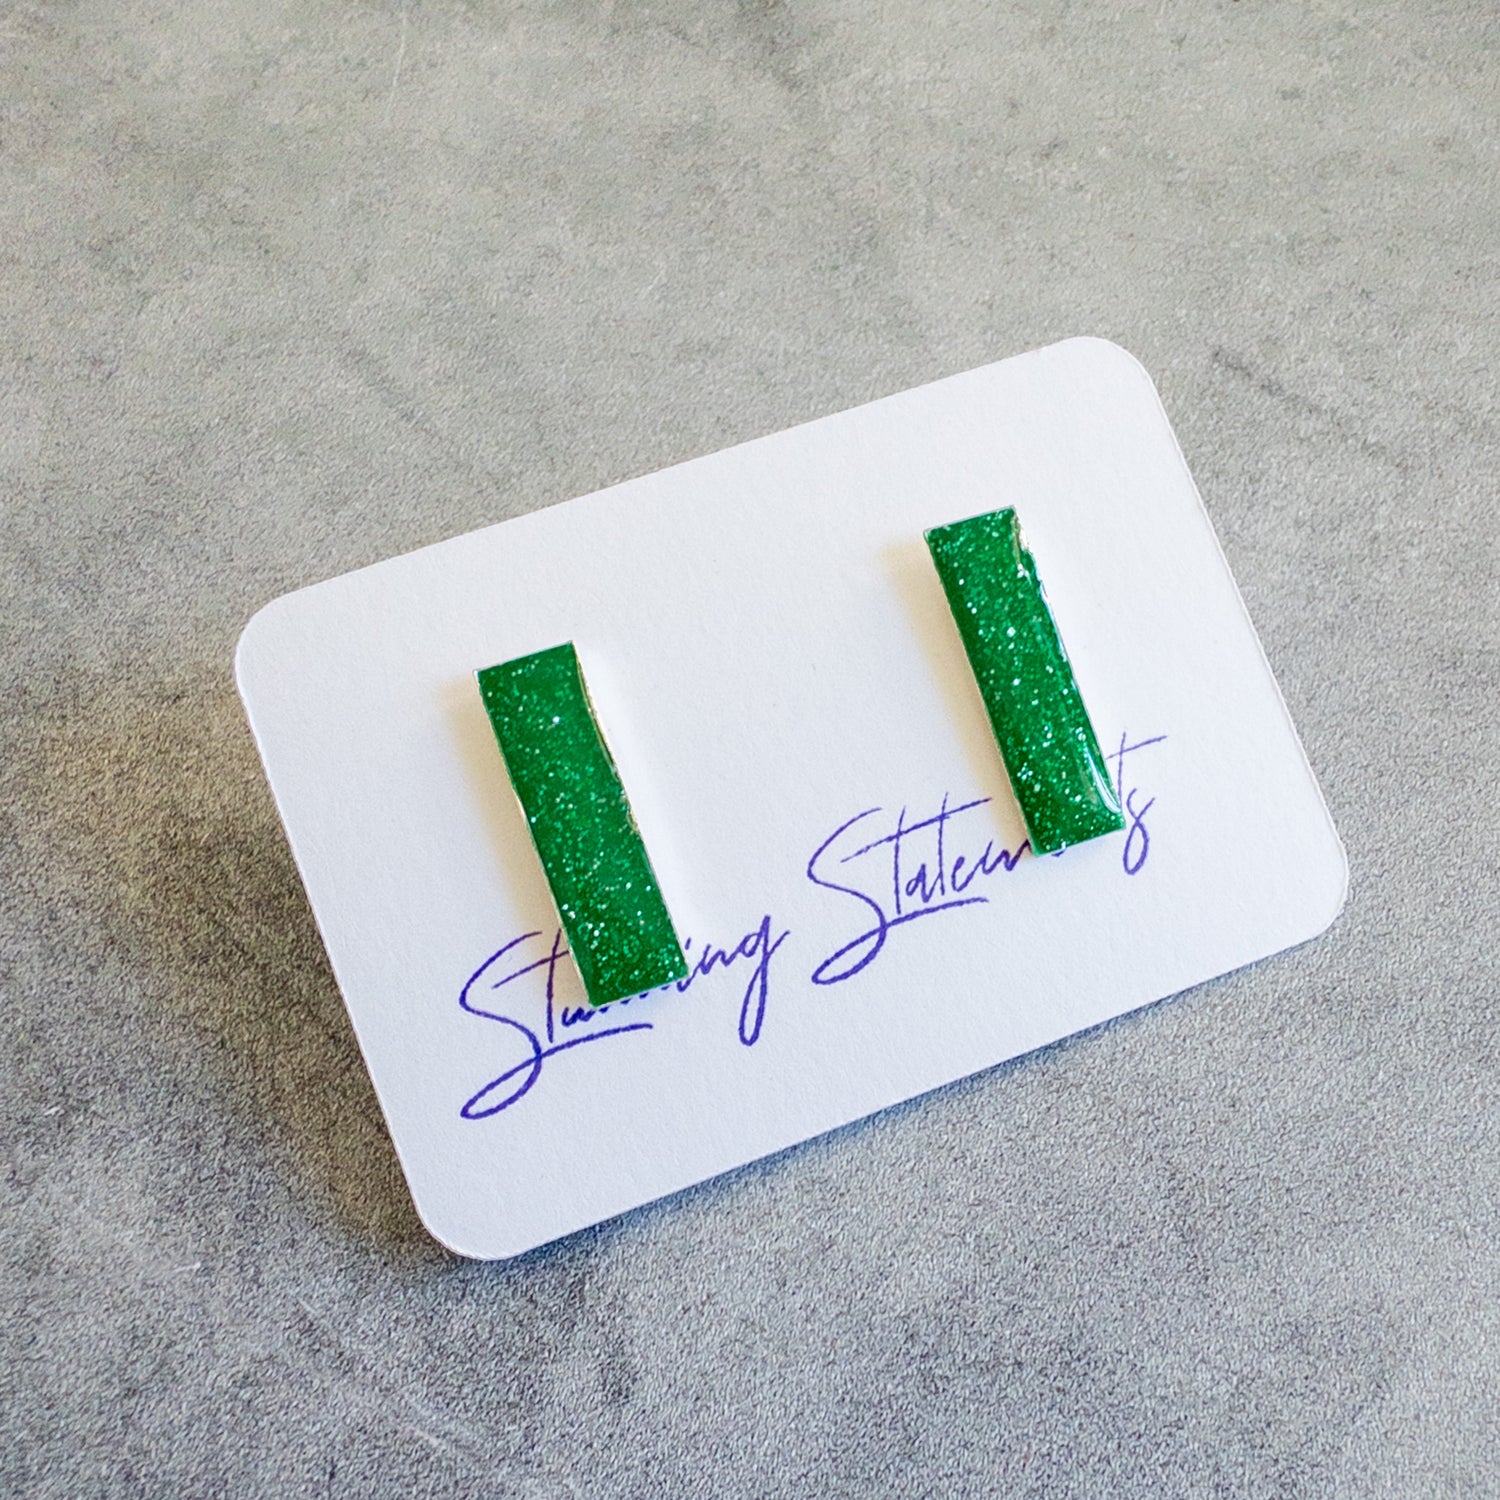 stunning statements clay lightweight small bitsy minimalist colorful rectangle green stacey stud earrings